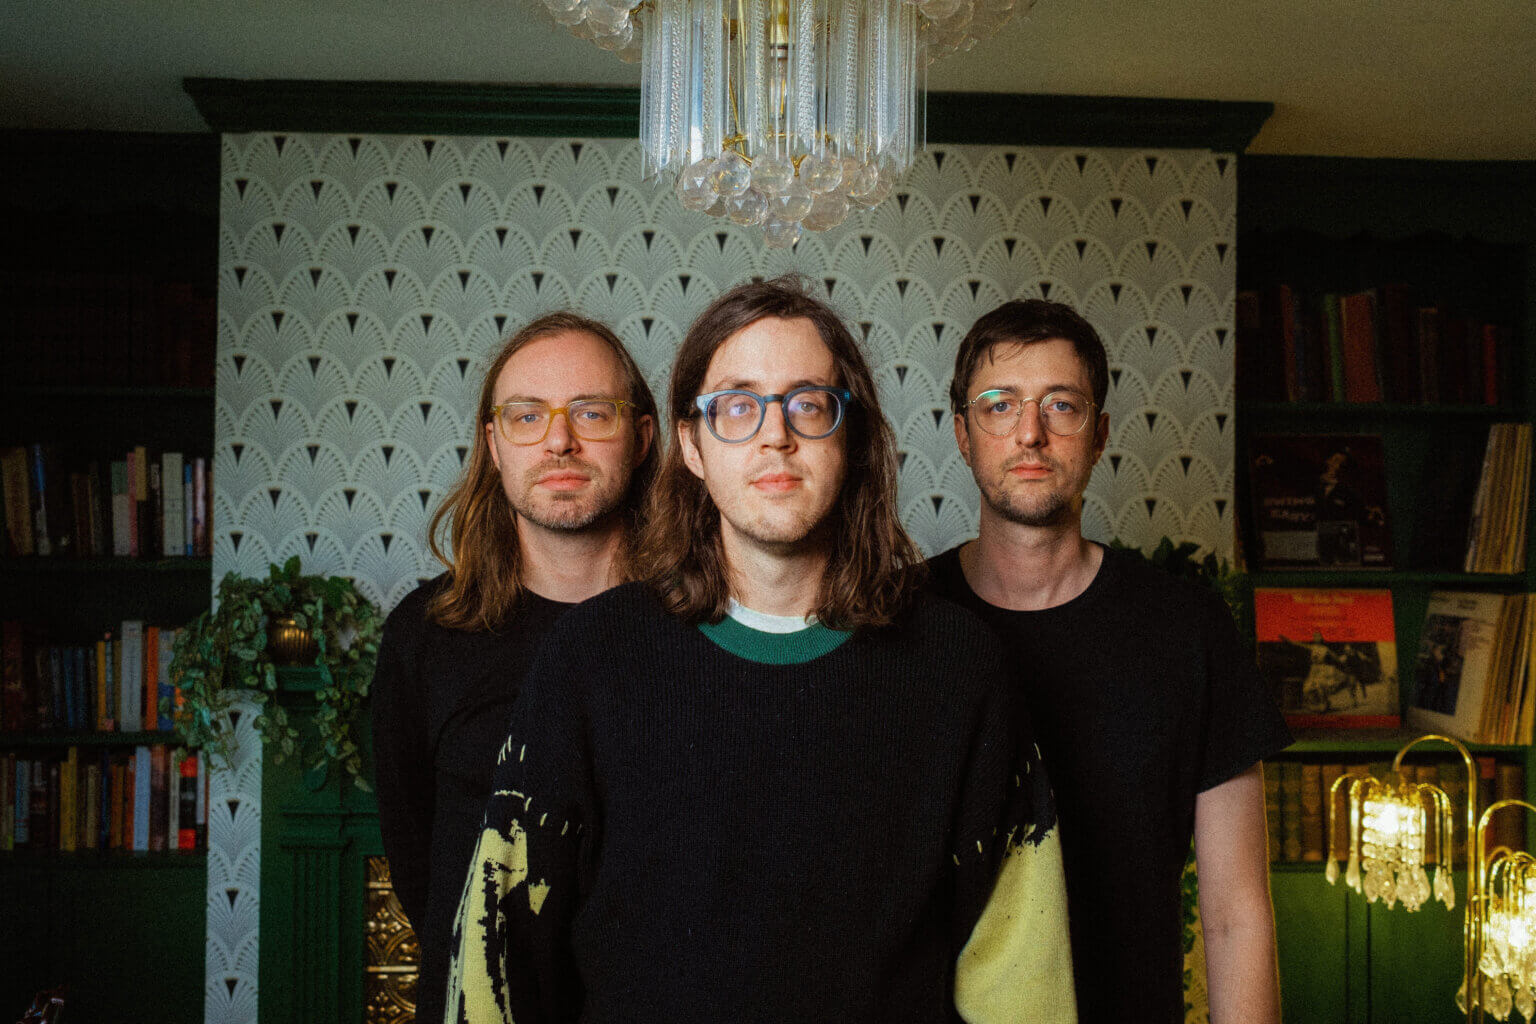 Cloud Nothings release their new album, Final Summer, on April 19th via Pure Noise. Today the trio share single "Silence"